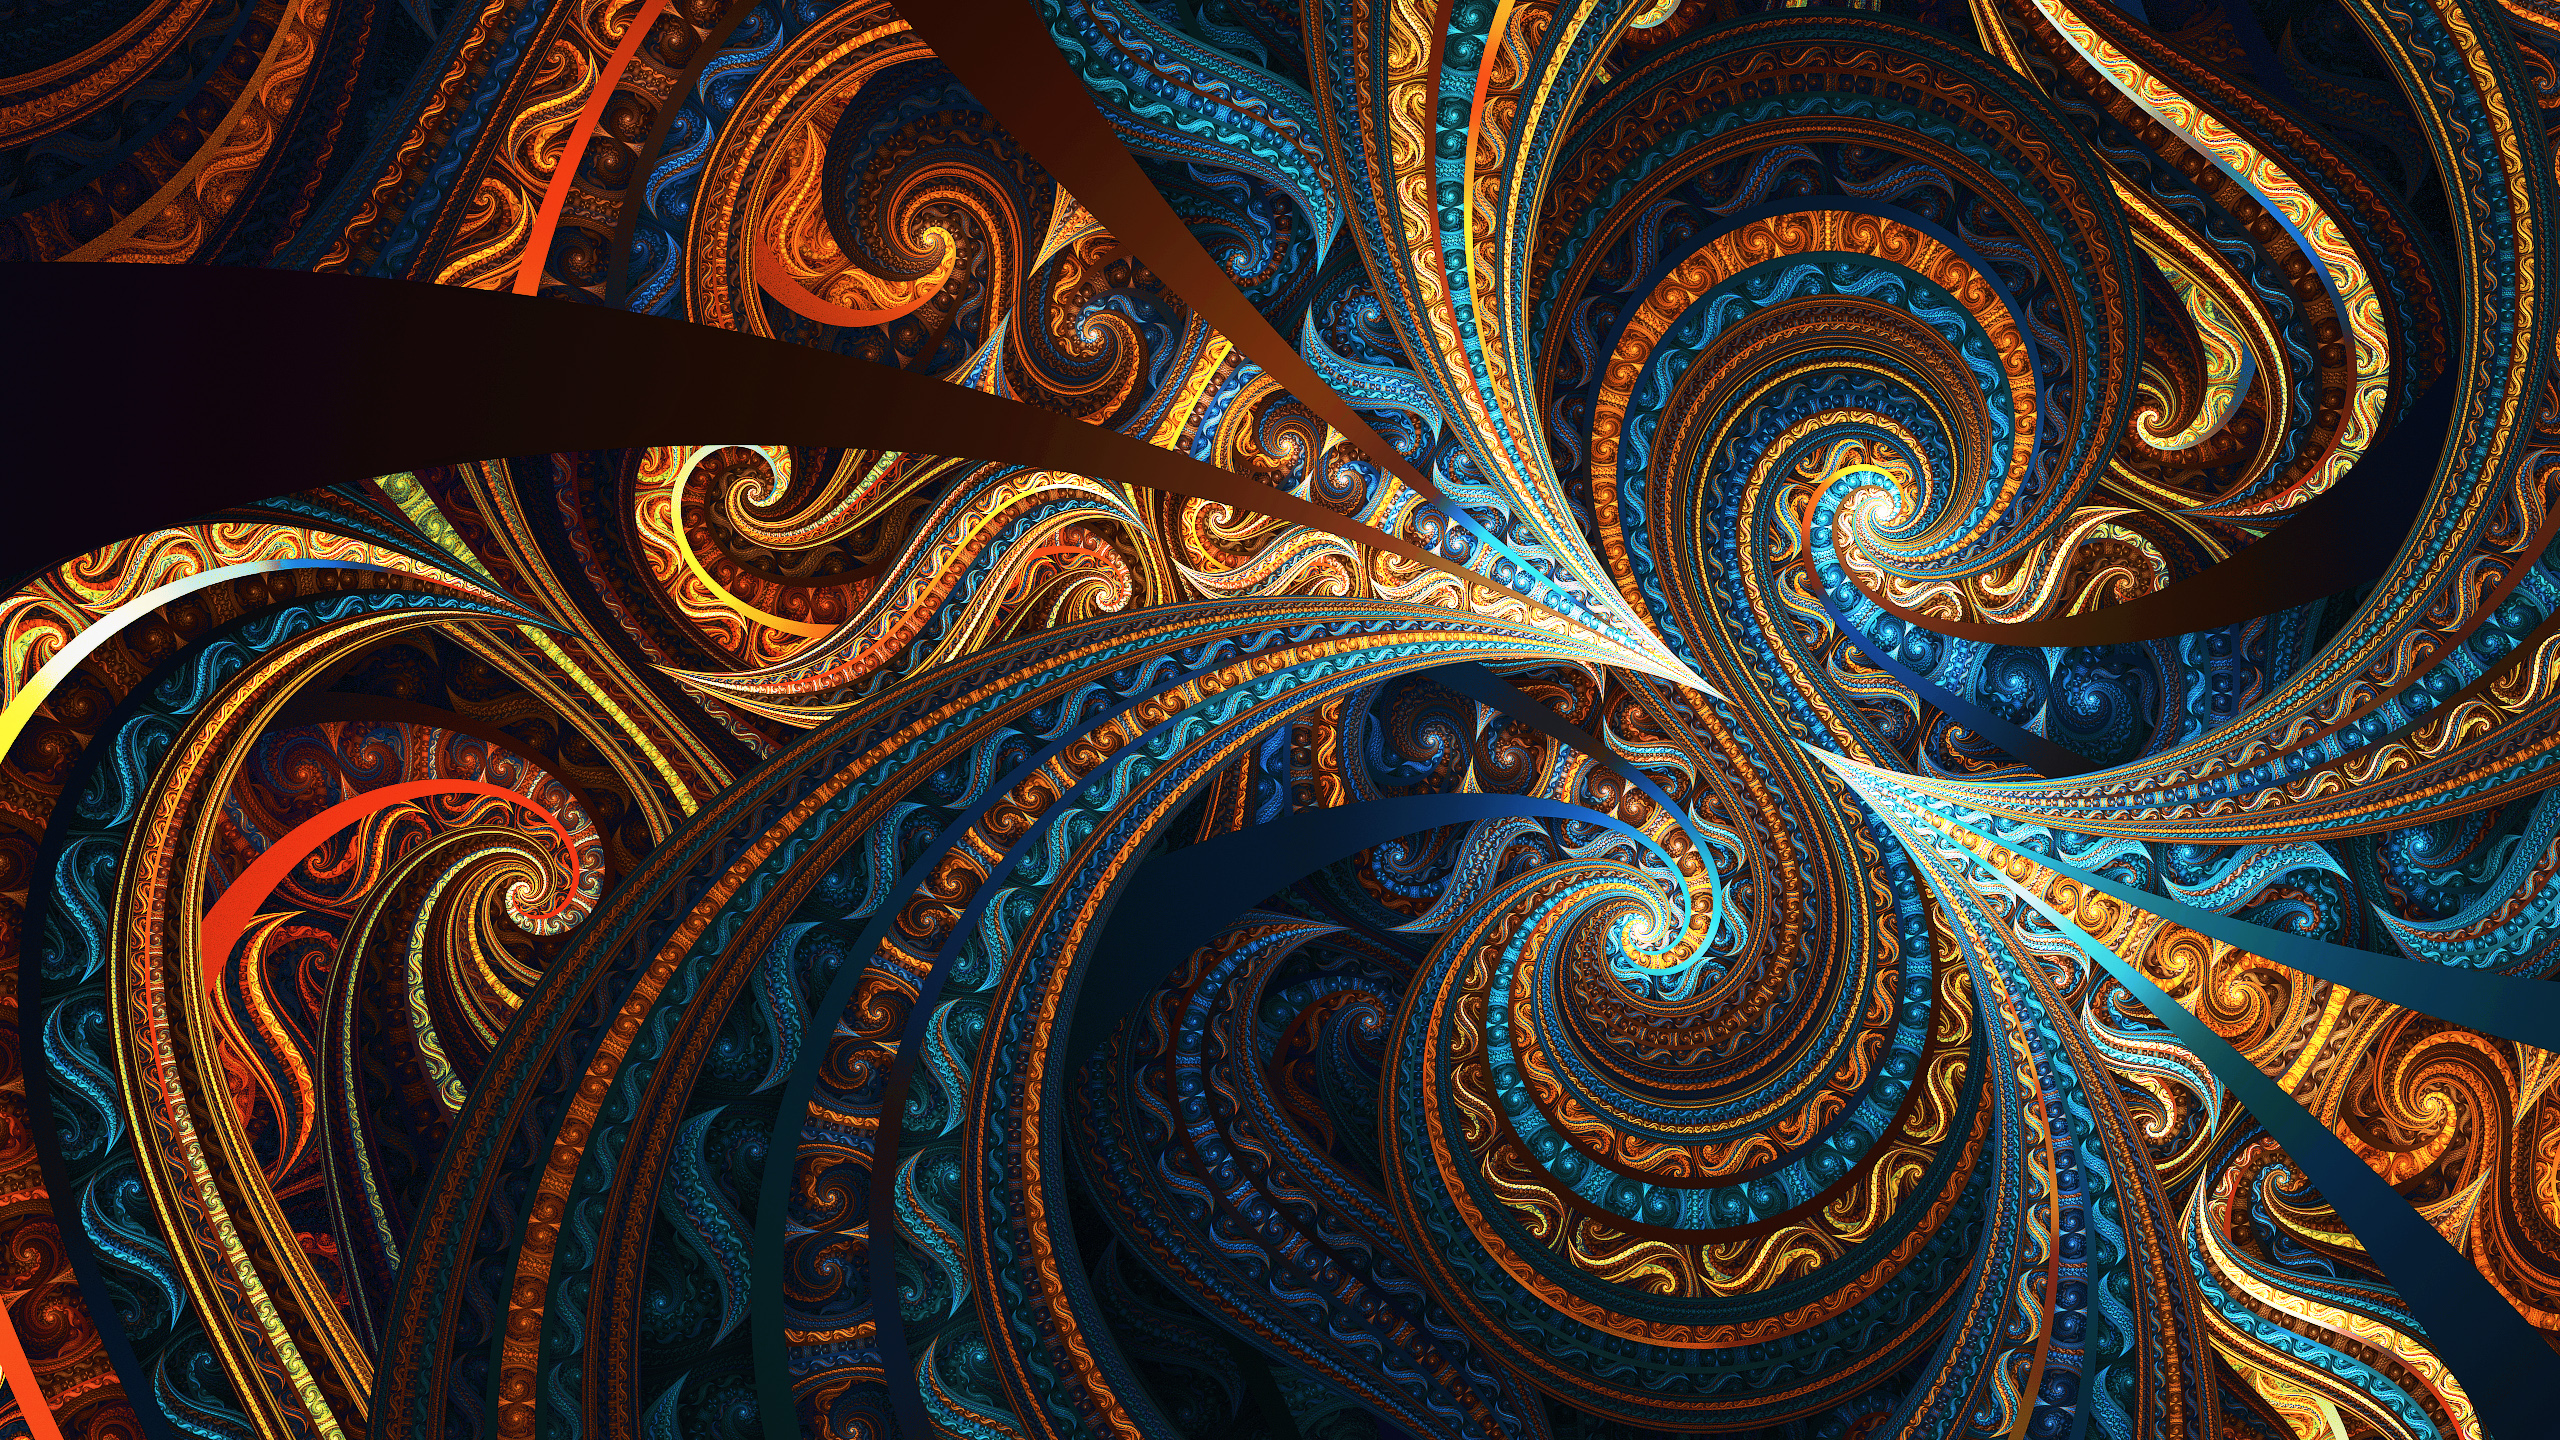 Colorful Fractal Wallpapers